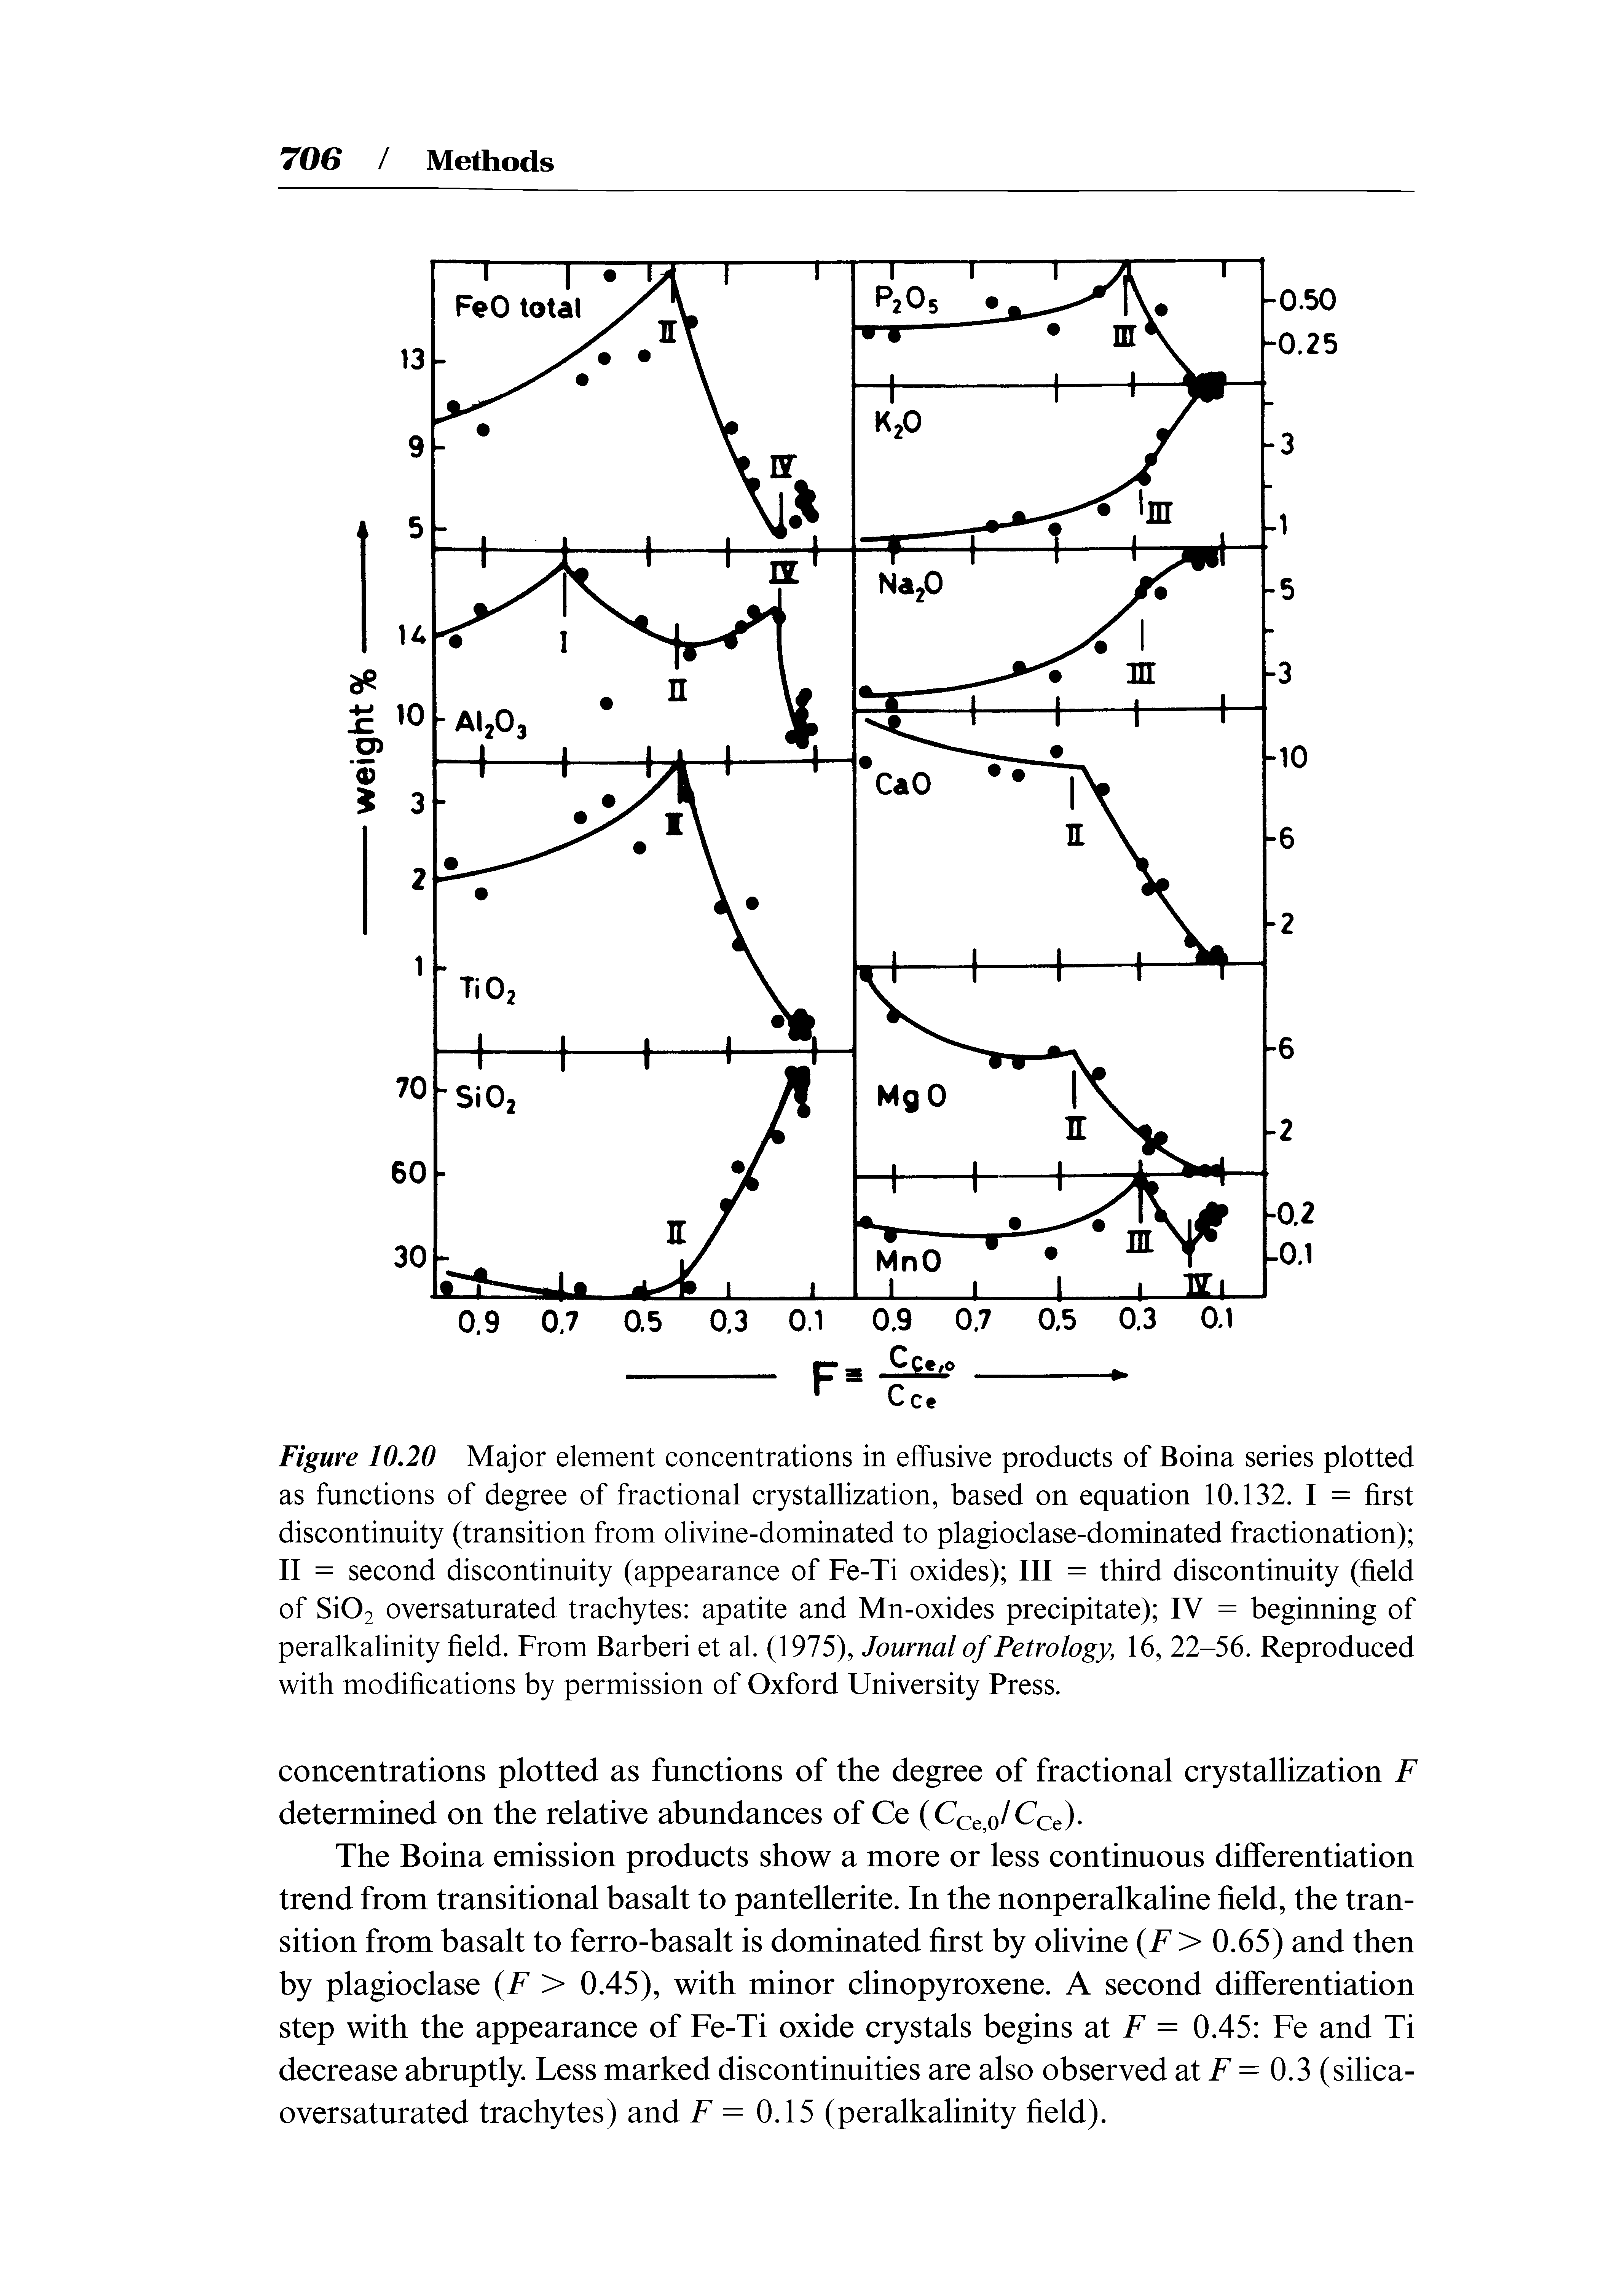 Figure 10,20 Major element concentrations in effusive products of Boina series plotted as functions of degree of fractional crystallization, based on equation 10.132. I = first discontinuity (transition from olivine-dominated to plagioclase-dominated fractionation) II = second discontinuity (appearance of Fe-Ti oxides) III = third discontinuity (field of Si02 oversaturated trachytes apatite and Mn-oxides precipitate) IV = beginning of peralkalinity field. From Barberi et al. (1975), Journal of Petrology, 16, 22-56. Reproduced with modifications by permission of Oxford University Press.